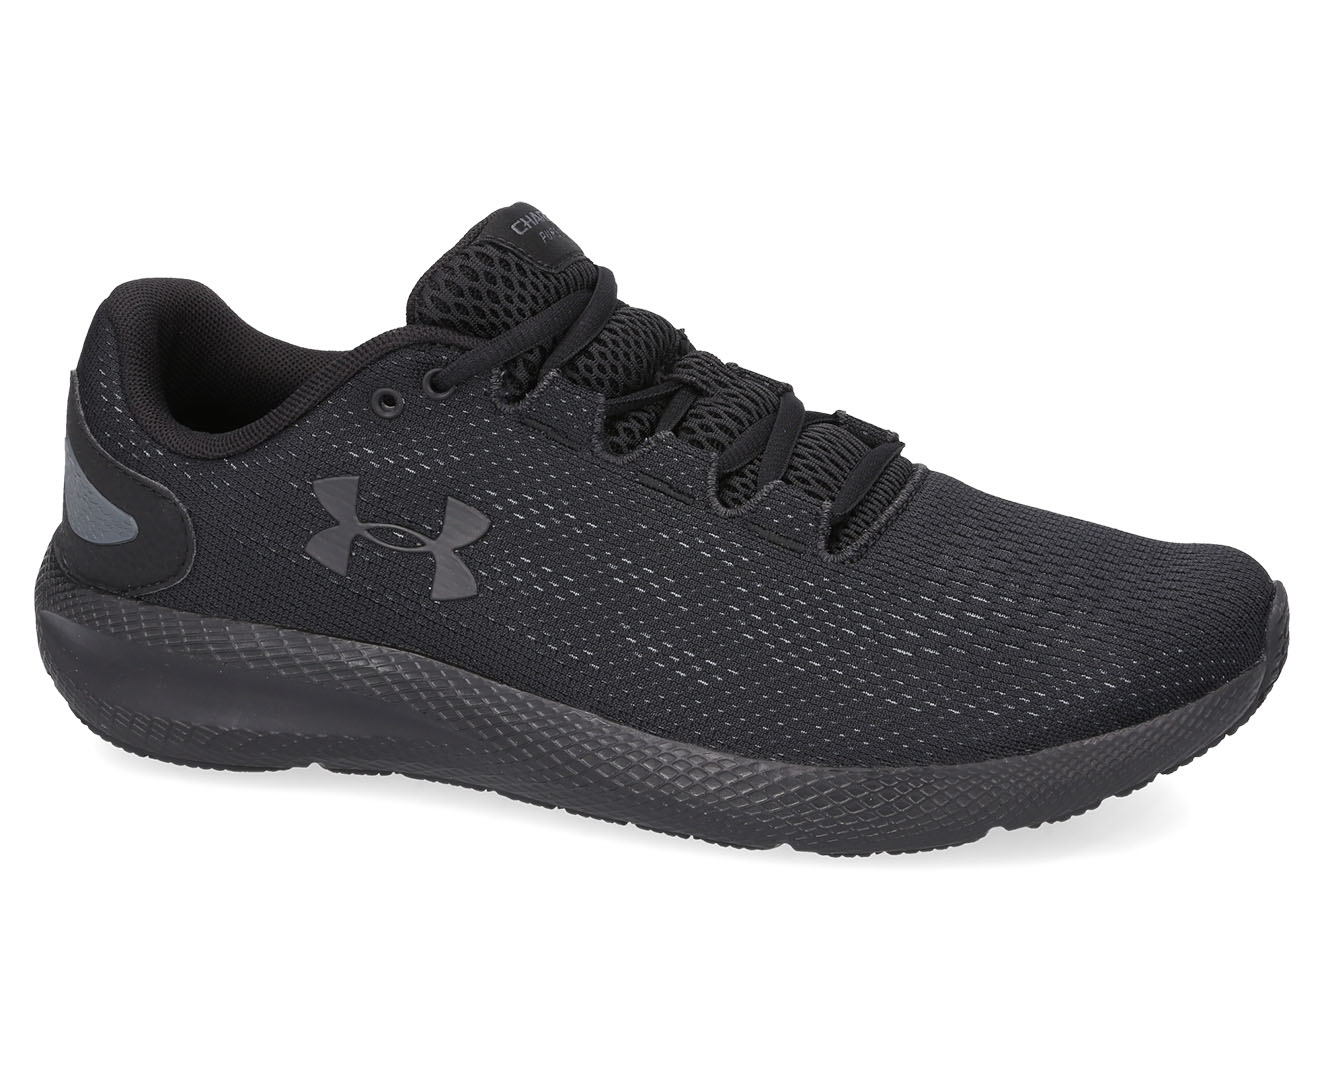 Under Armour Men s UA Charged Pursuit 2 Running Shoes Black Catch